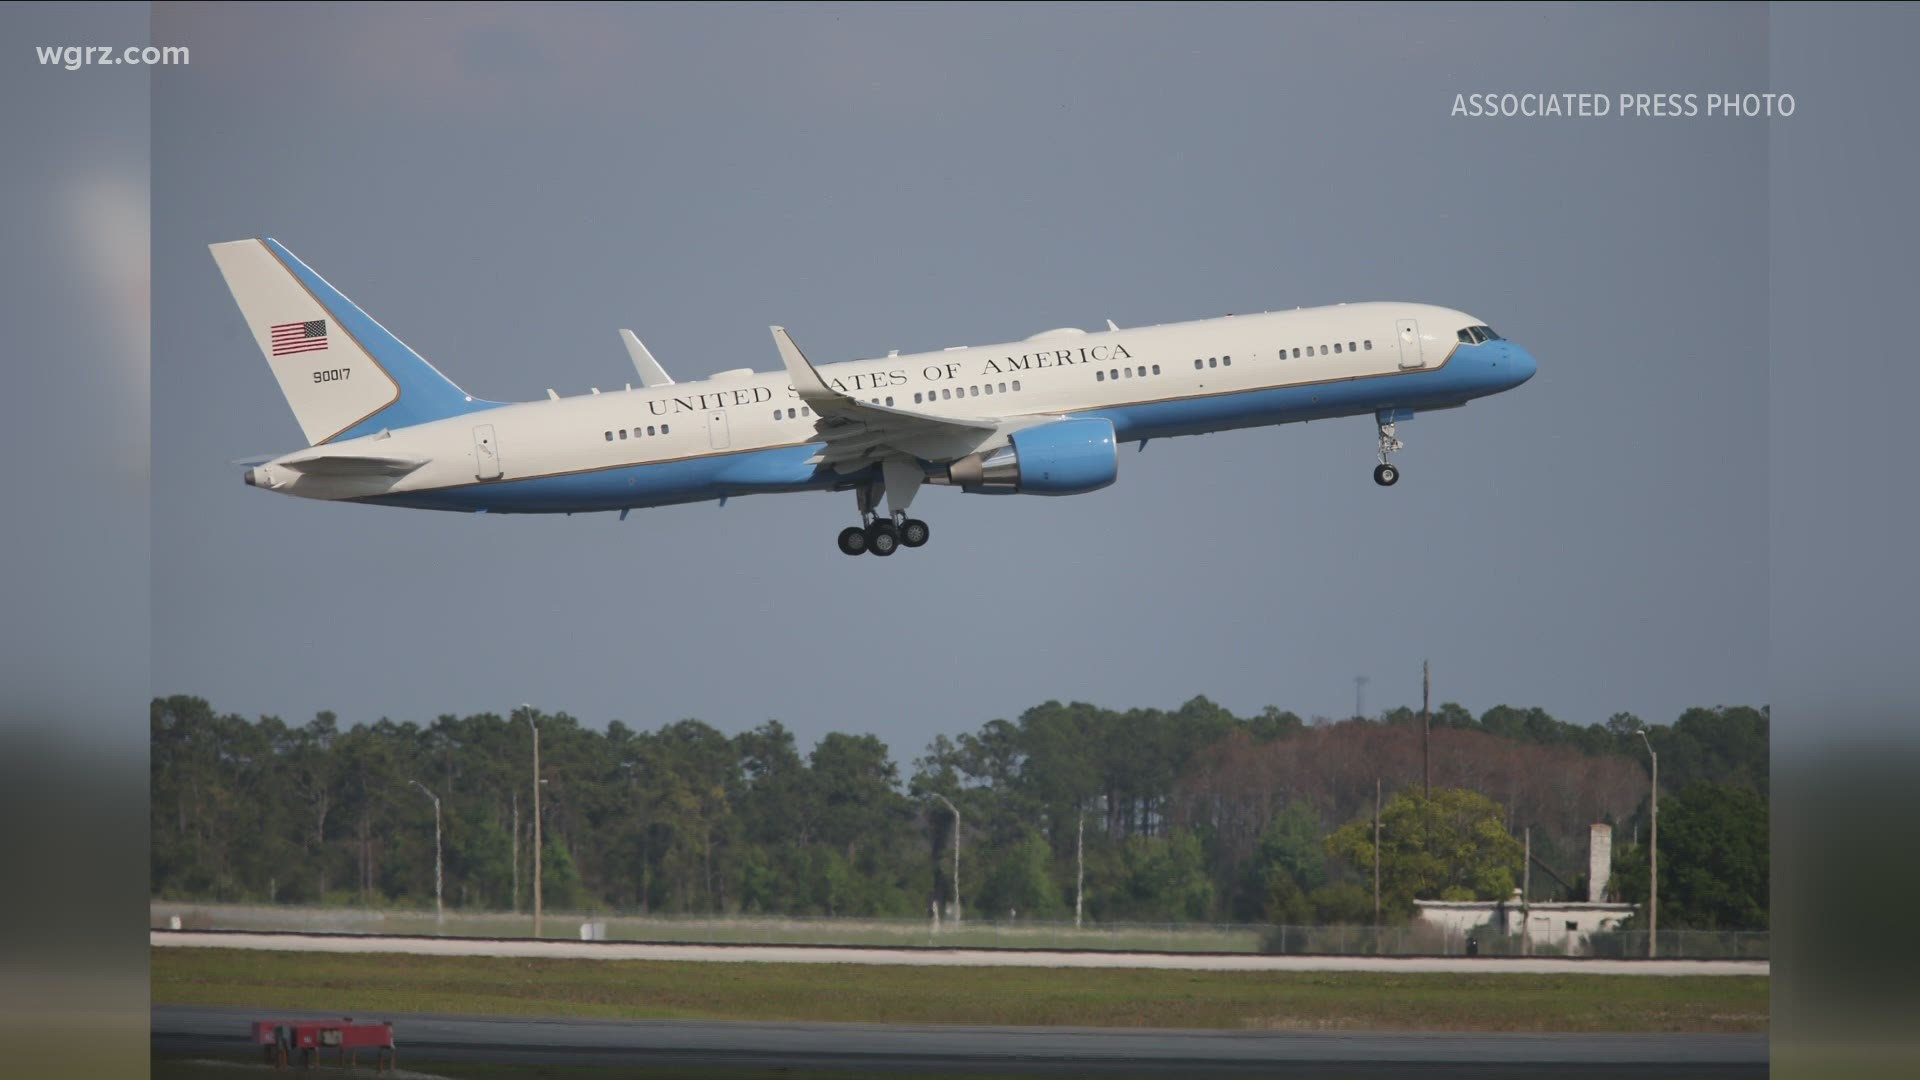 Was Air Force One at the airport?